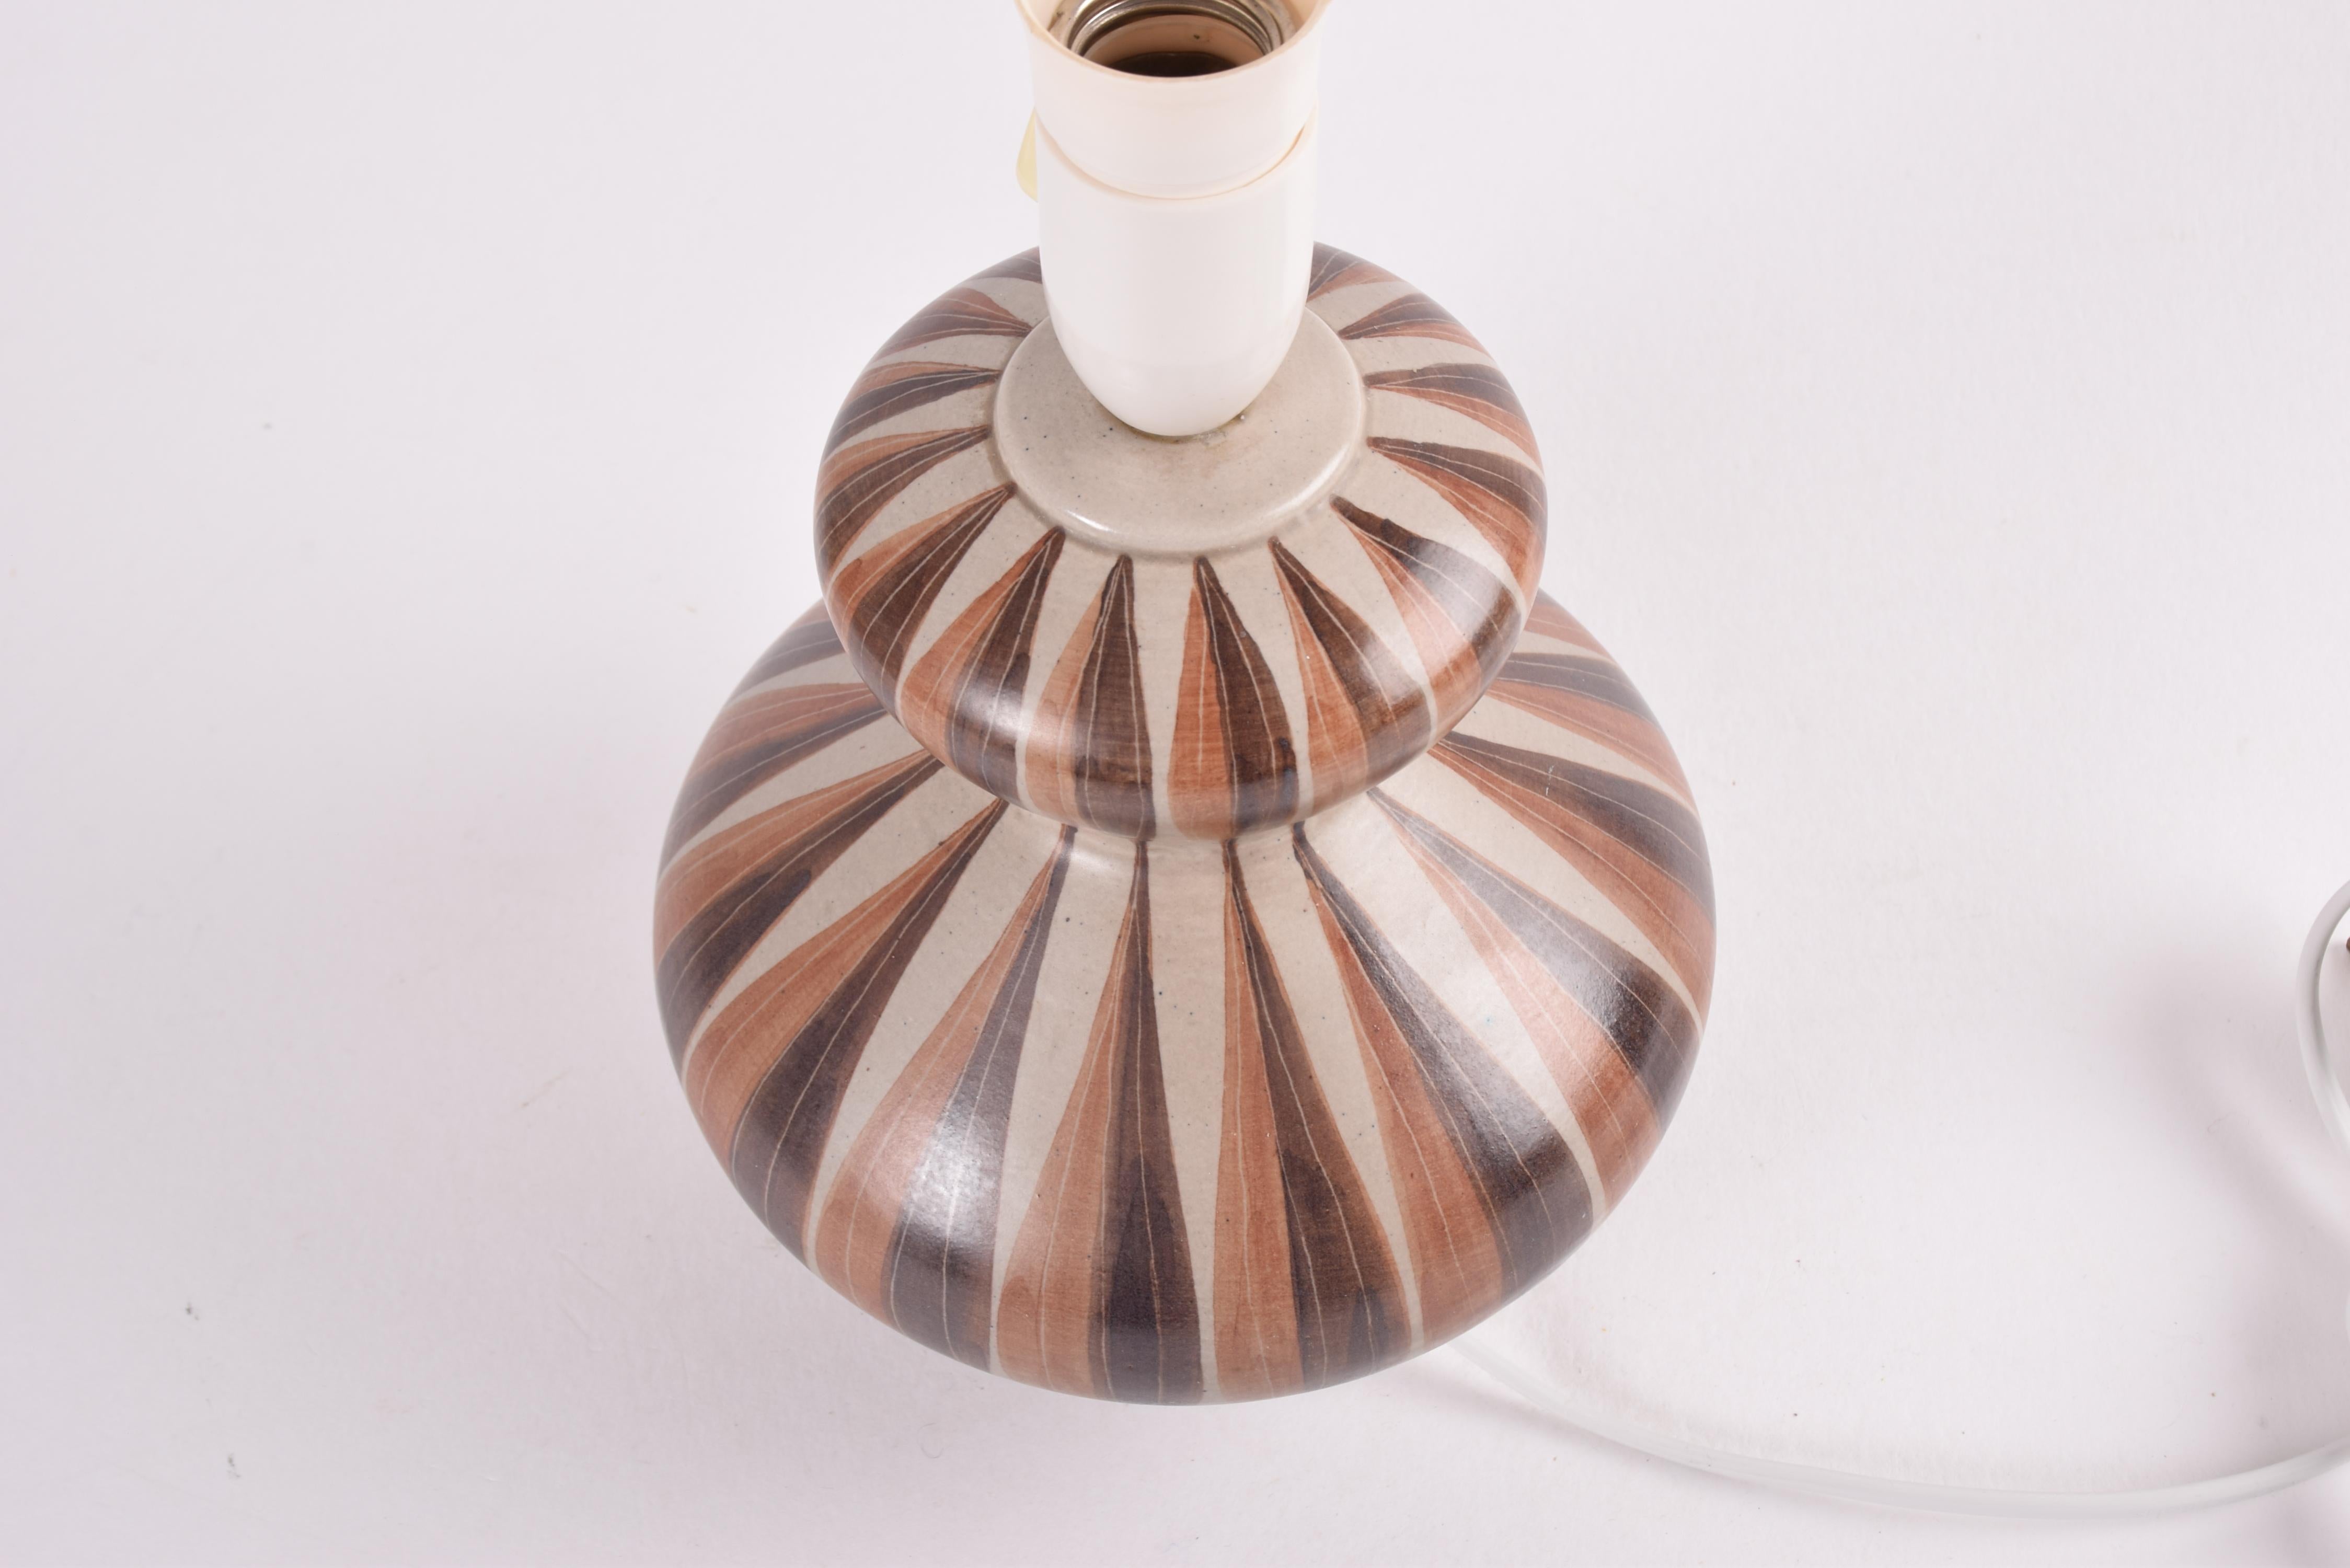 Danish Sculptural Table Lamp with Brown Stripes by Eva & Johannes Andersen 1960s For Sale 2